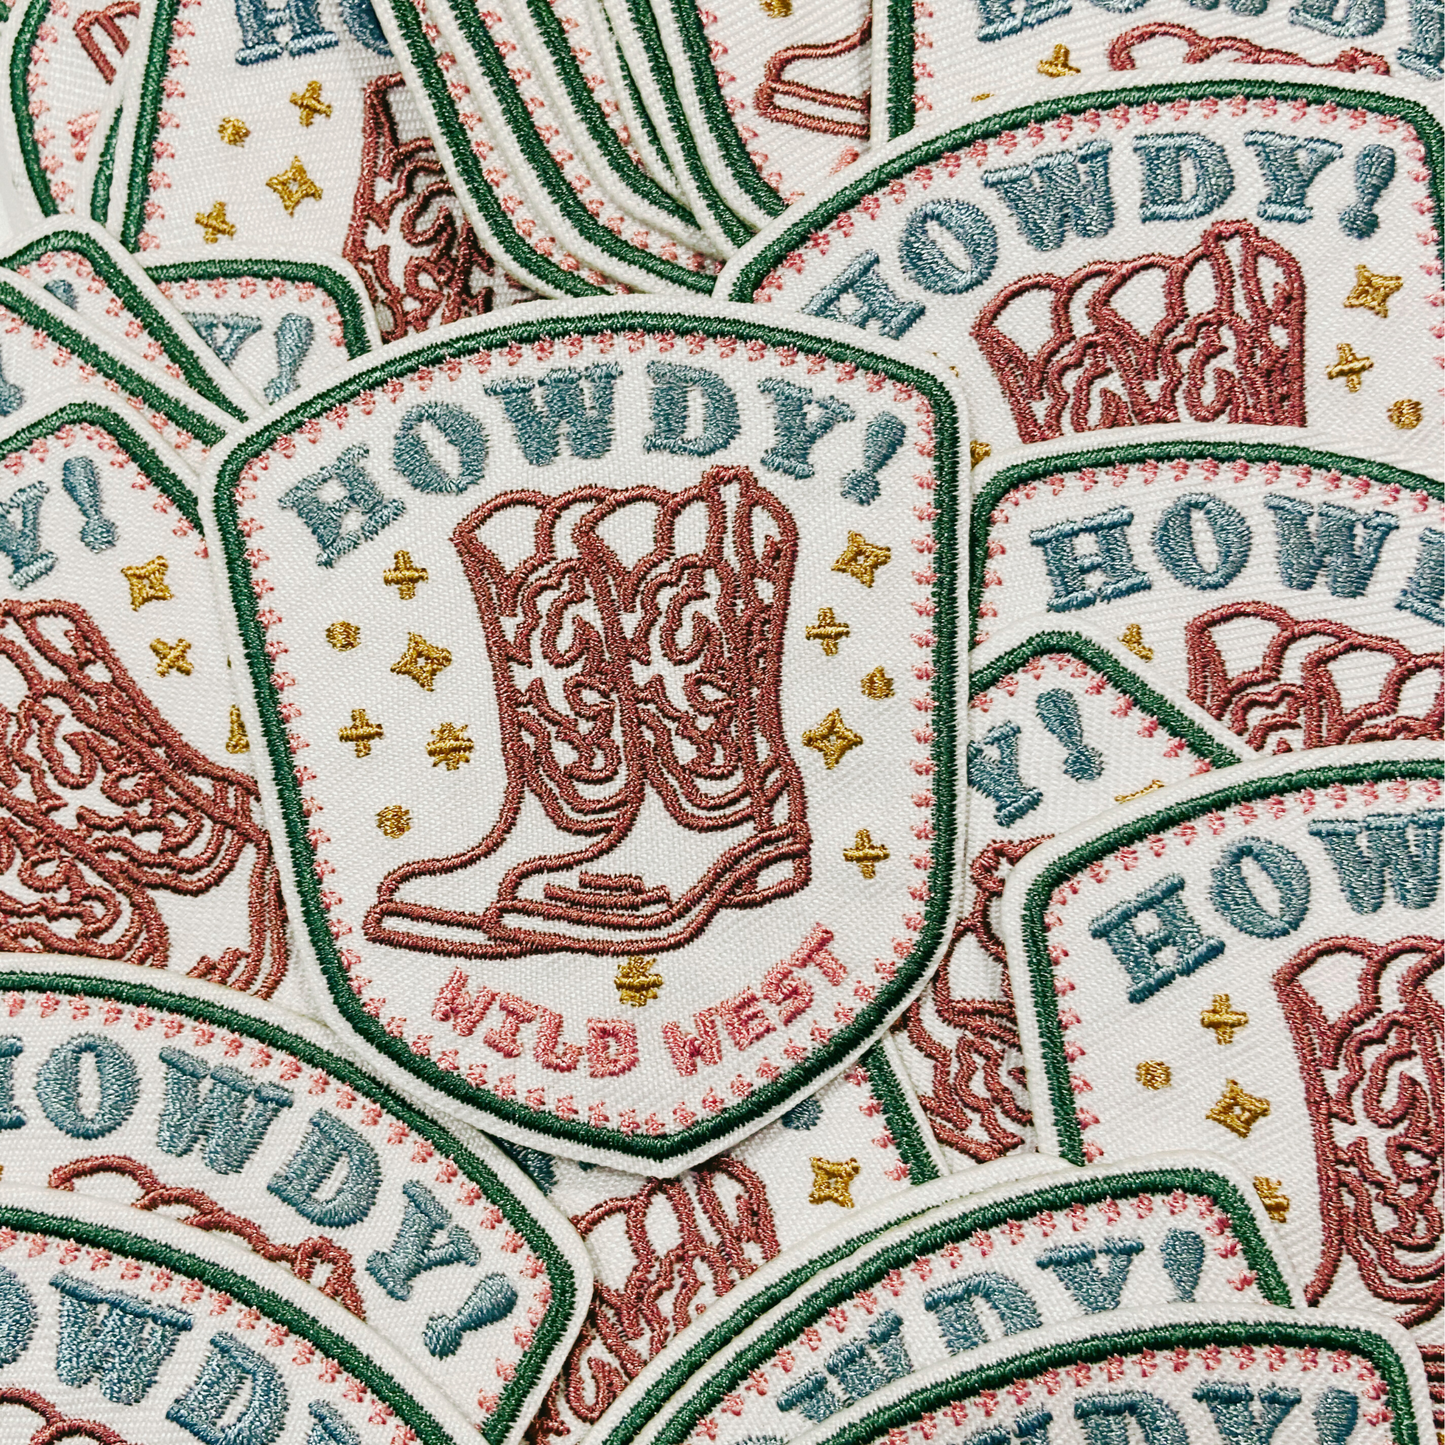 3"  Howdy Wild West -  Embroidered Hat Patch